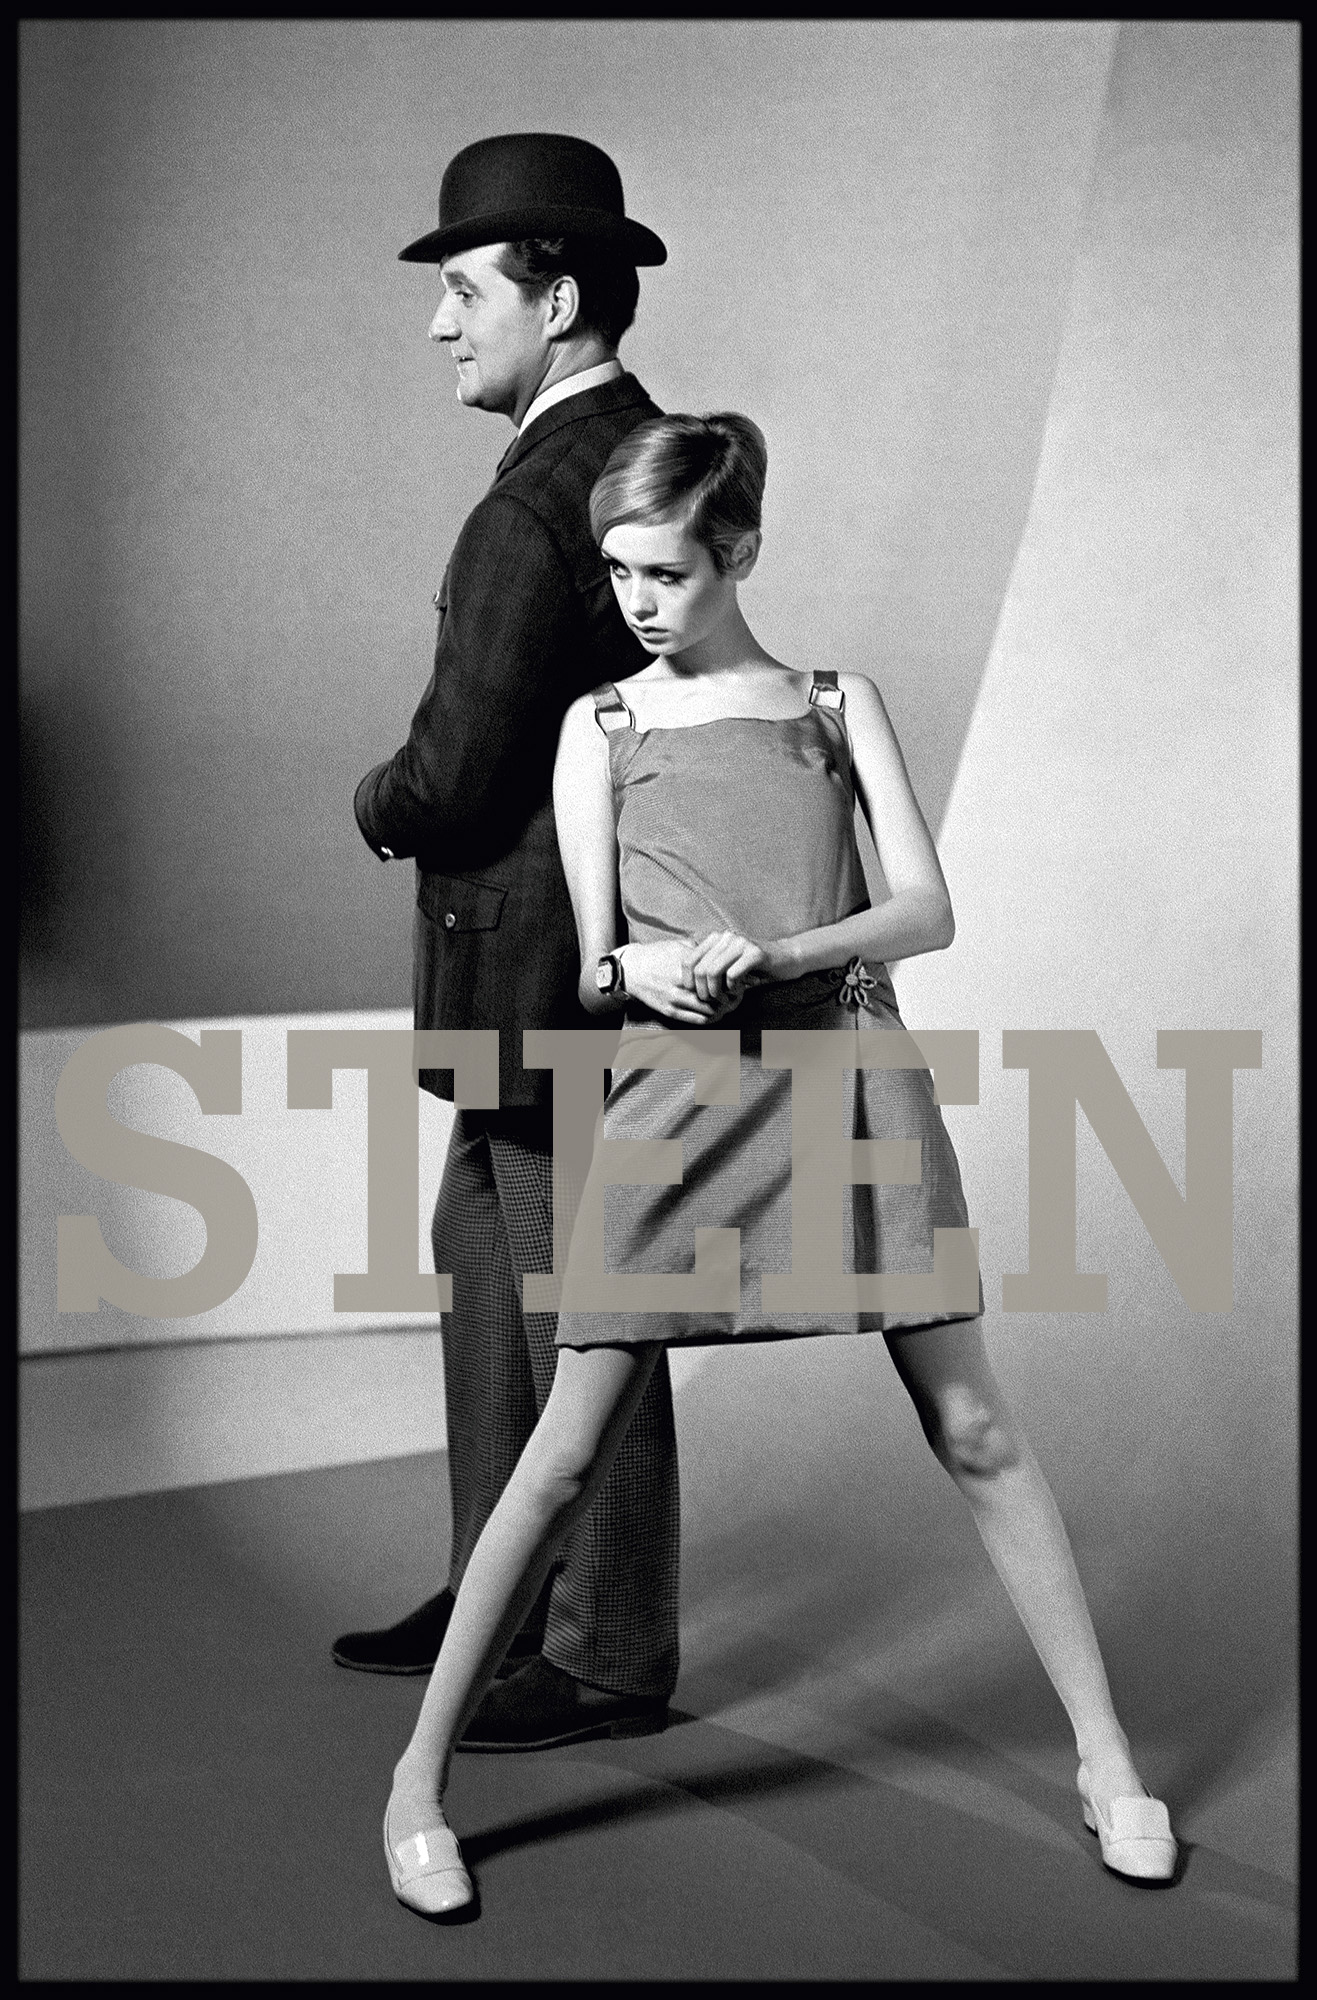 exclusive limited edition photograph of the swinging sixties fashion model twiggy with The Avengers actor patrick macnee as John Steed by british photographer david steen